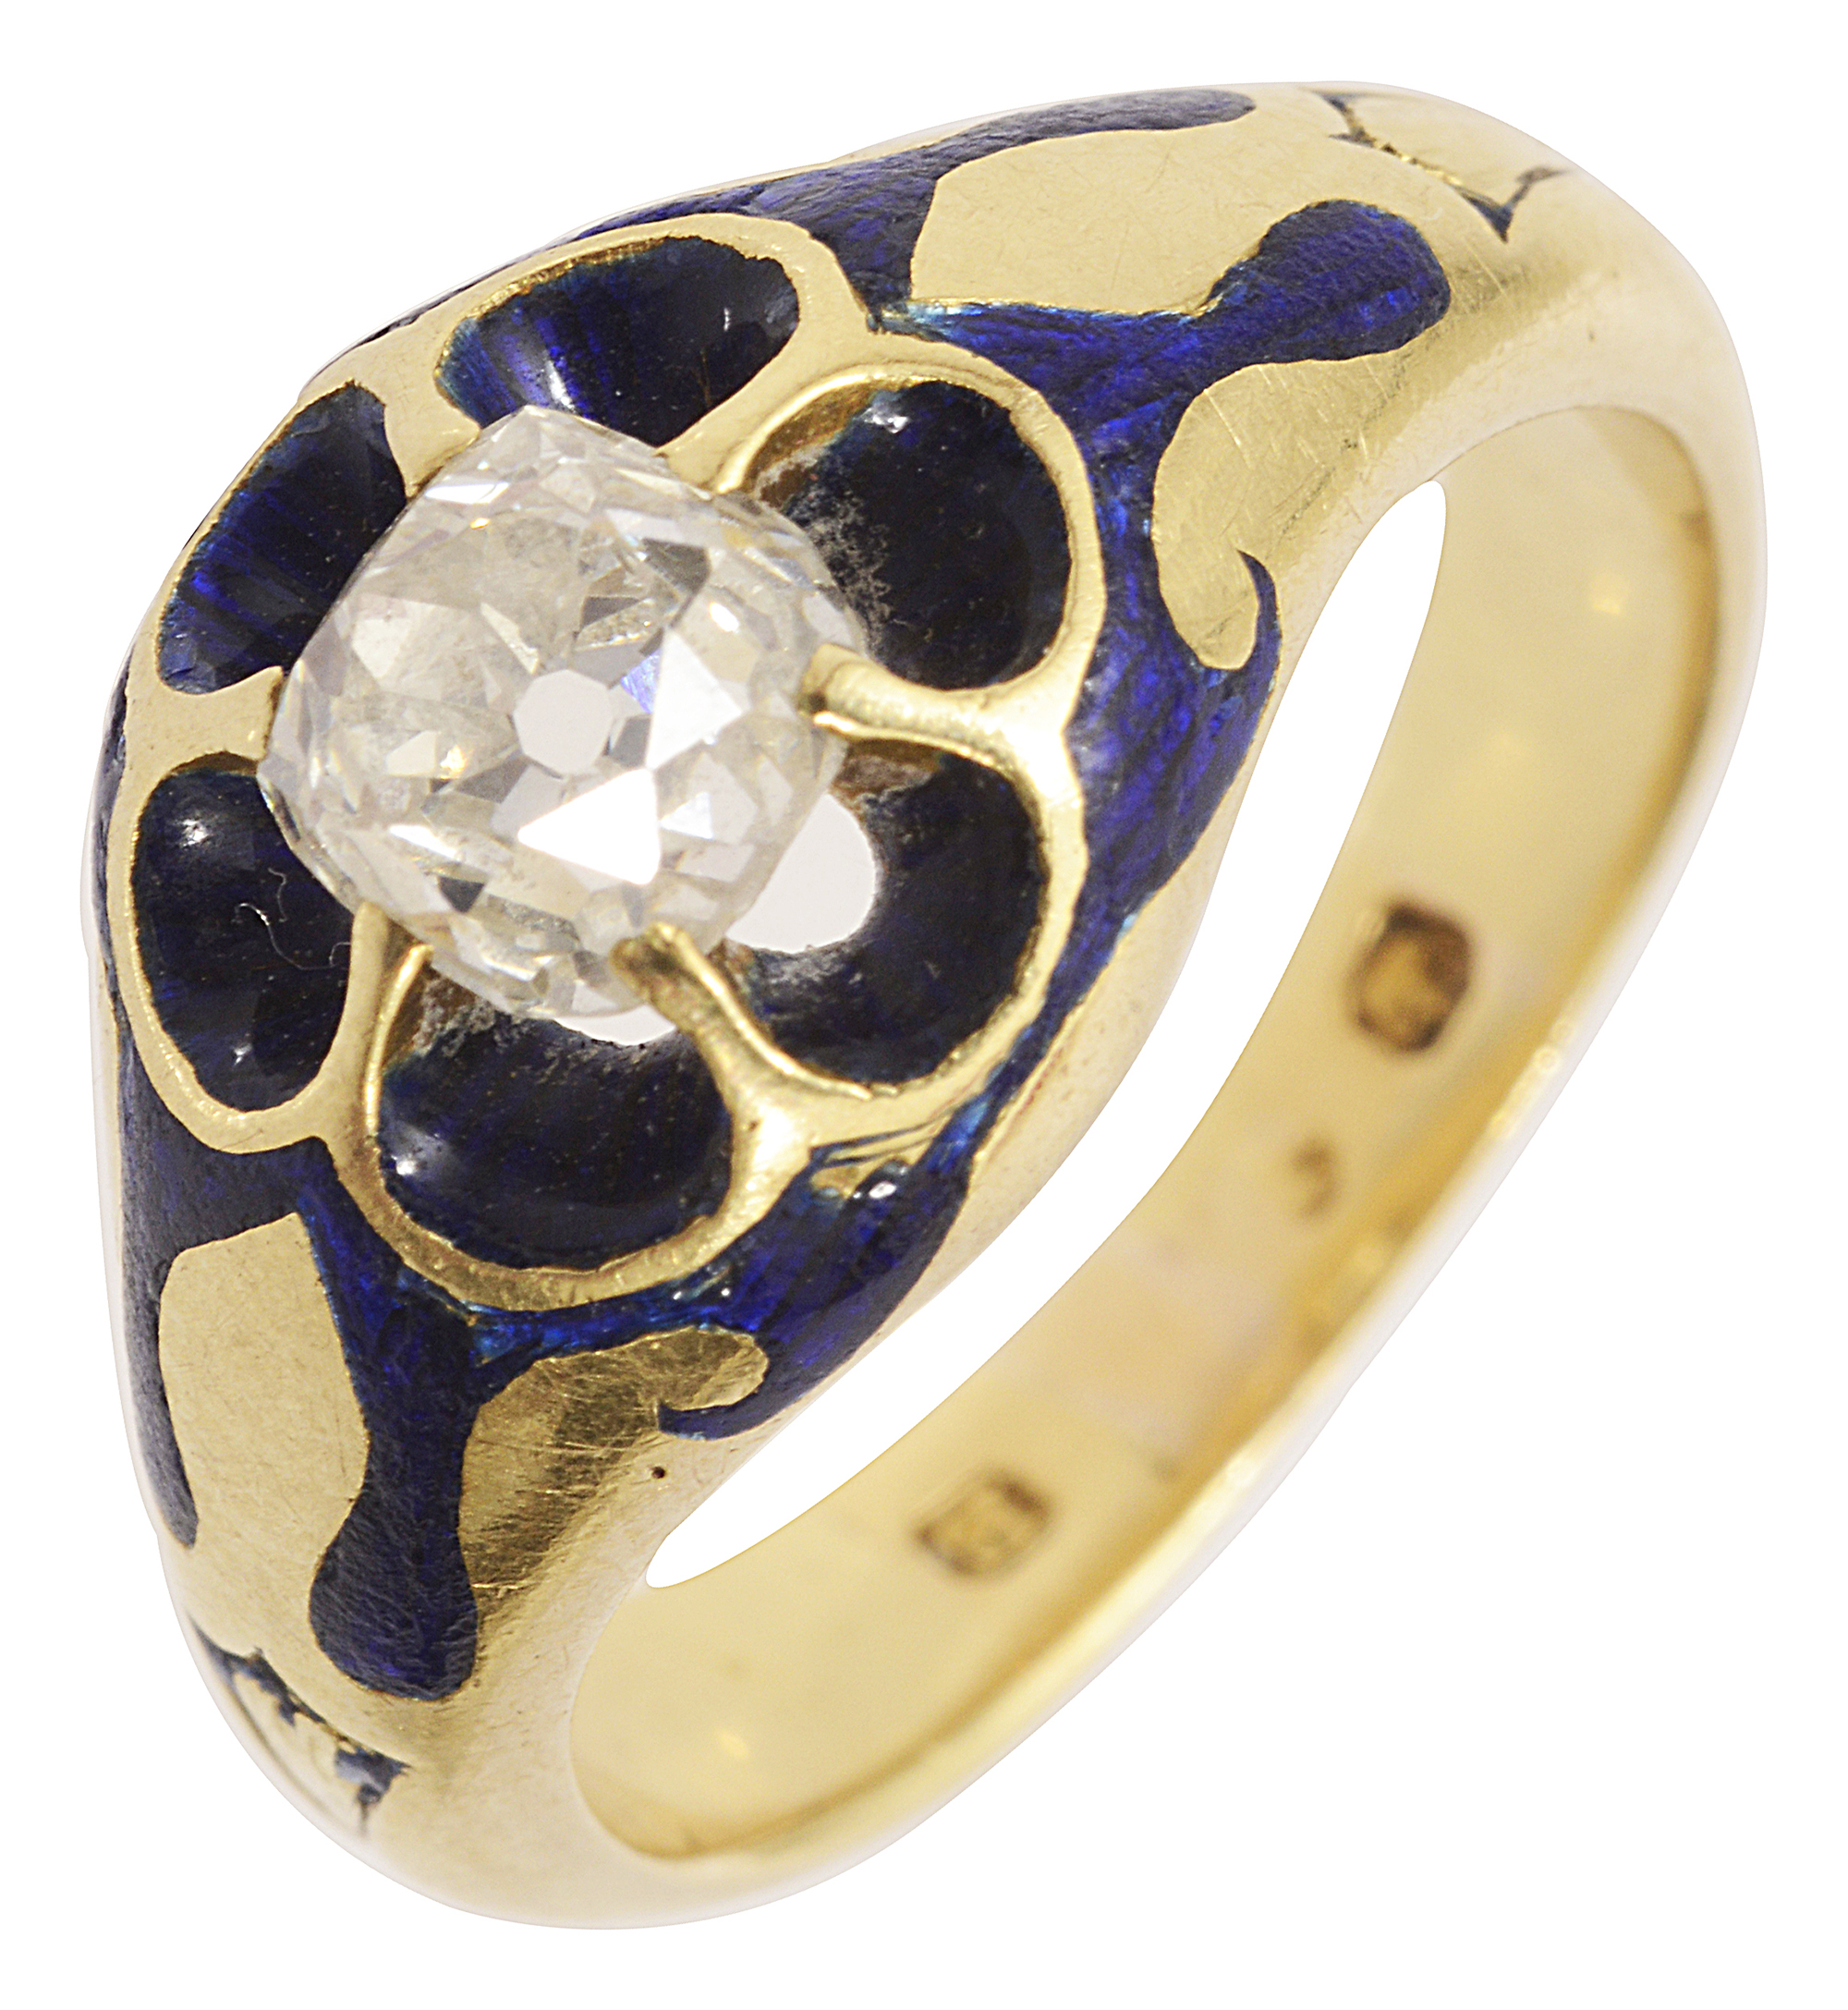 A late Vict. diamond and enamel ring